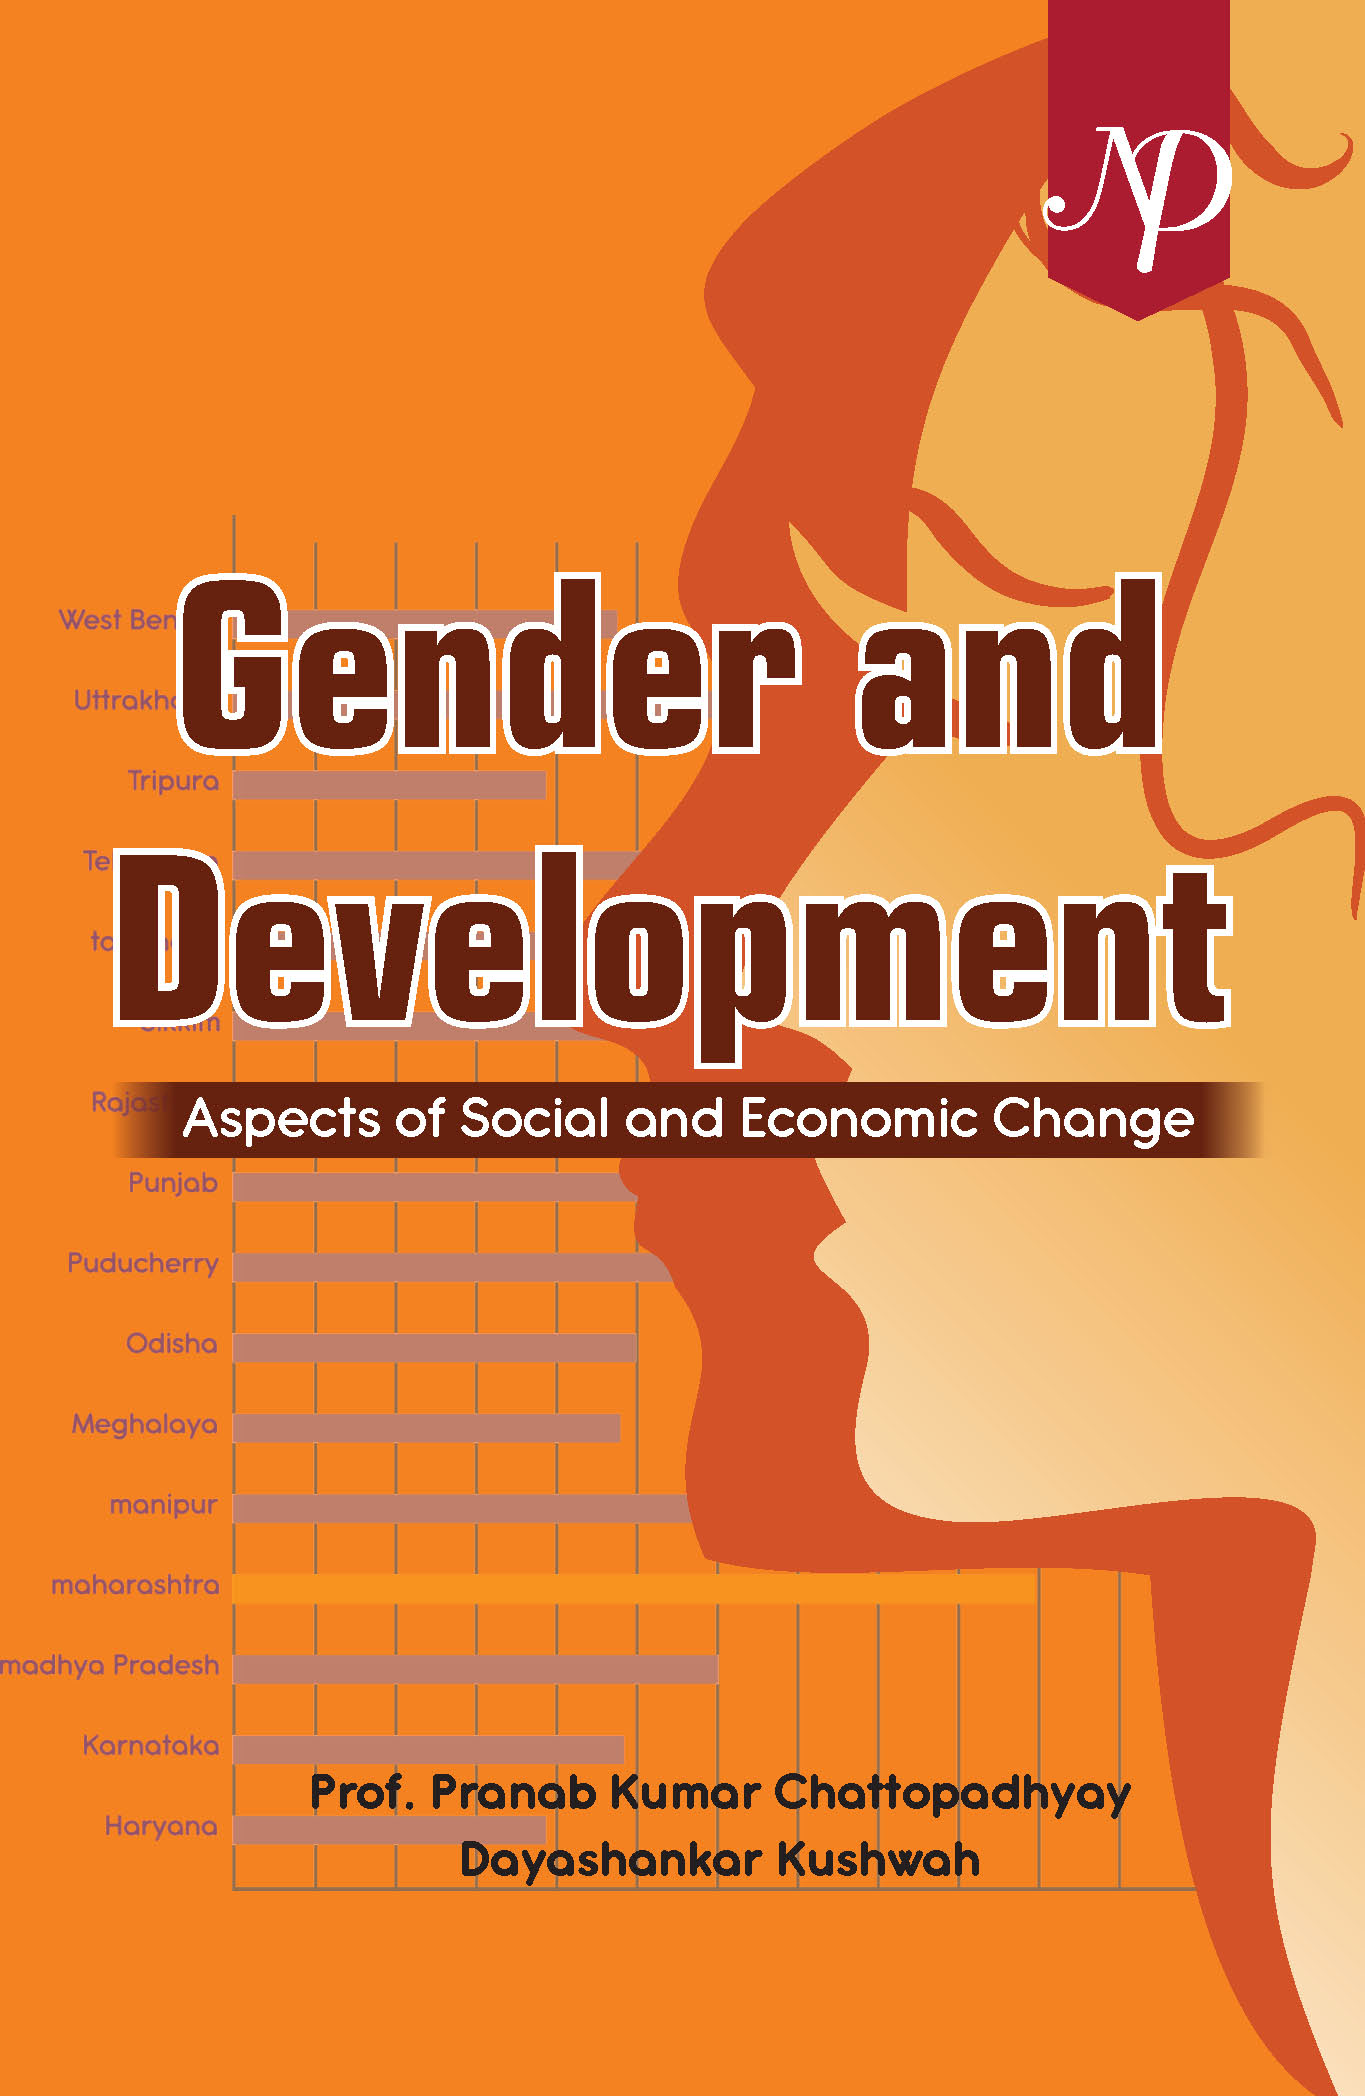 Gender and Development Aspects of Social and Economic Change cover by dayashankar.jpg